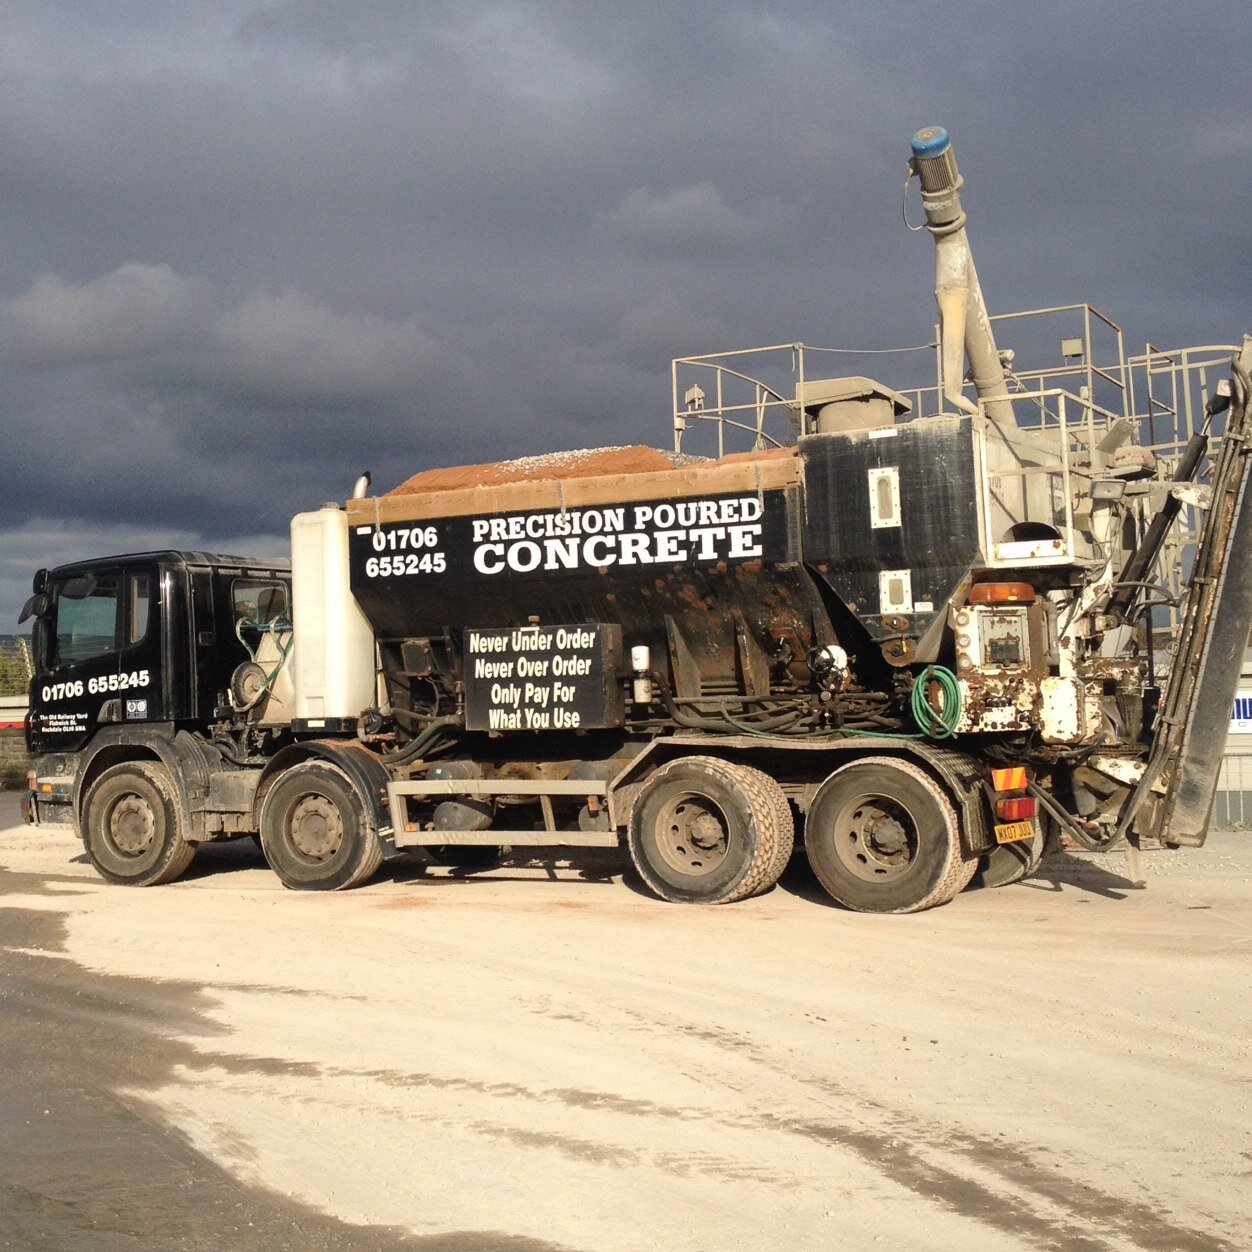 Independent BSI Registered Readymix CONCRETE and SCREED, for both private and trade customers across the Greater Manchester & Lancashire region. 01706 655245